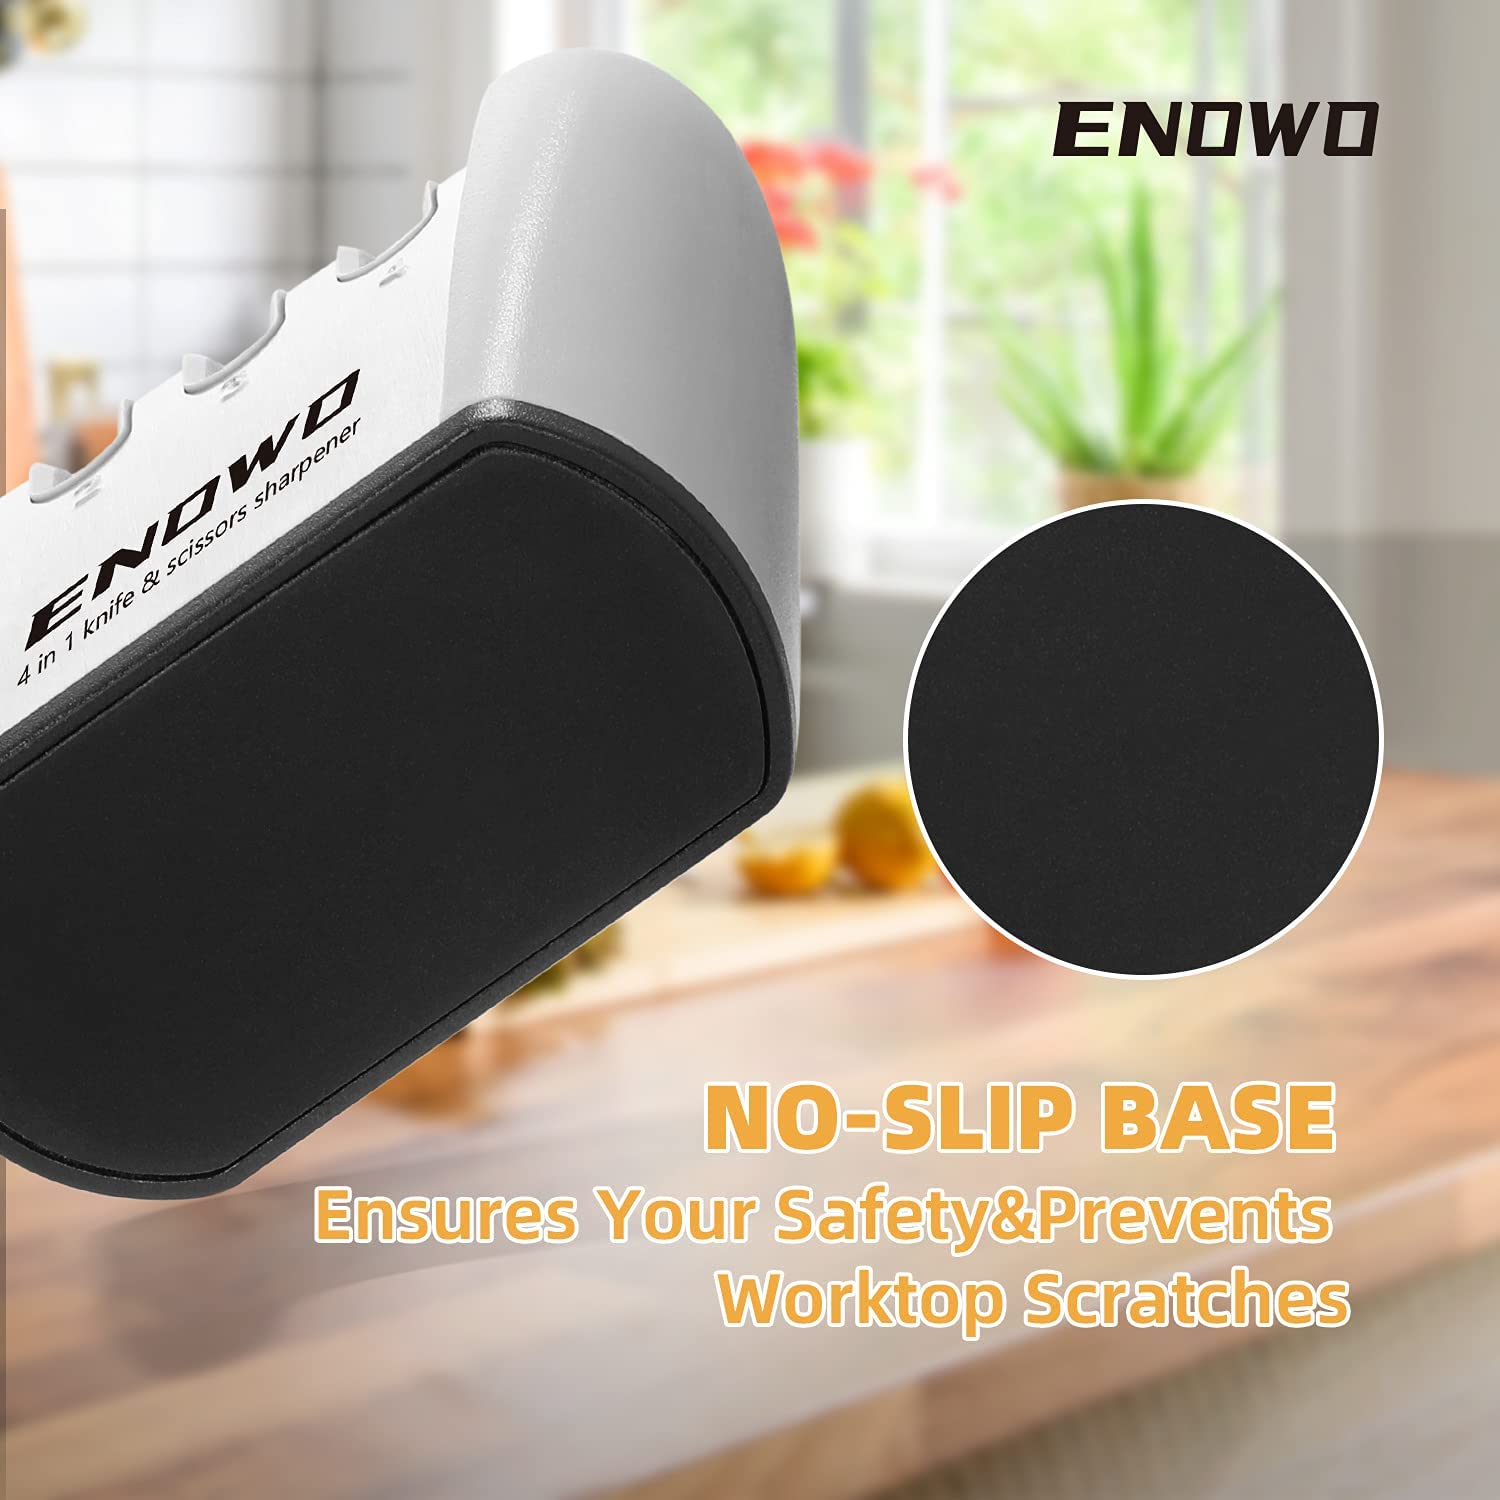 enowo Premium Knife Sharpeners,4 Stage Kitchen Knives Sharpener Helps Repair,Restore & Polish Straight-Edge Dull Knives & Sharpen Scissors Quickly and Safely,Easy to Use Blade Sharpener